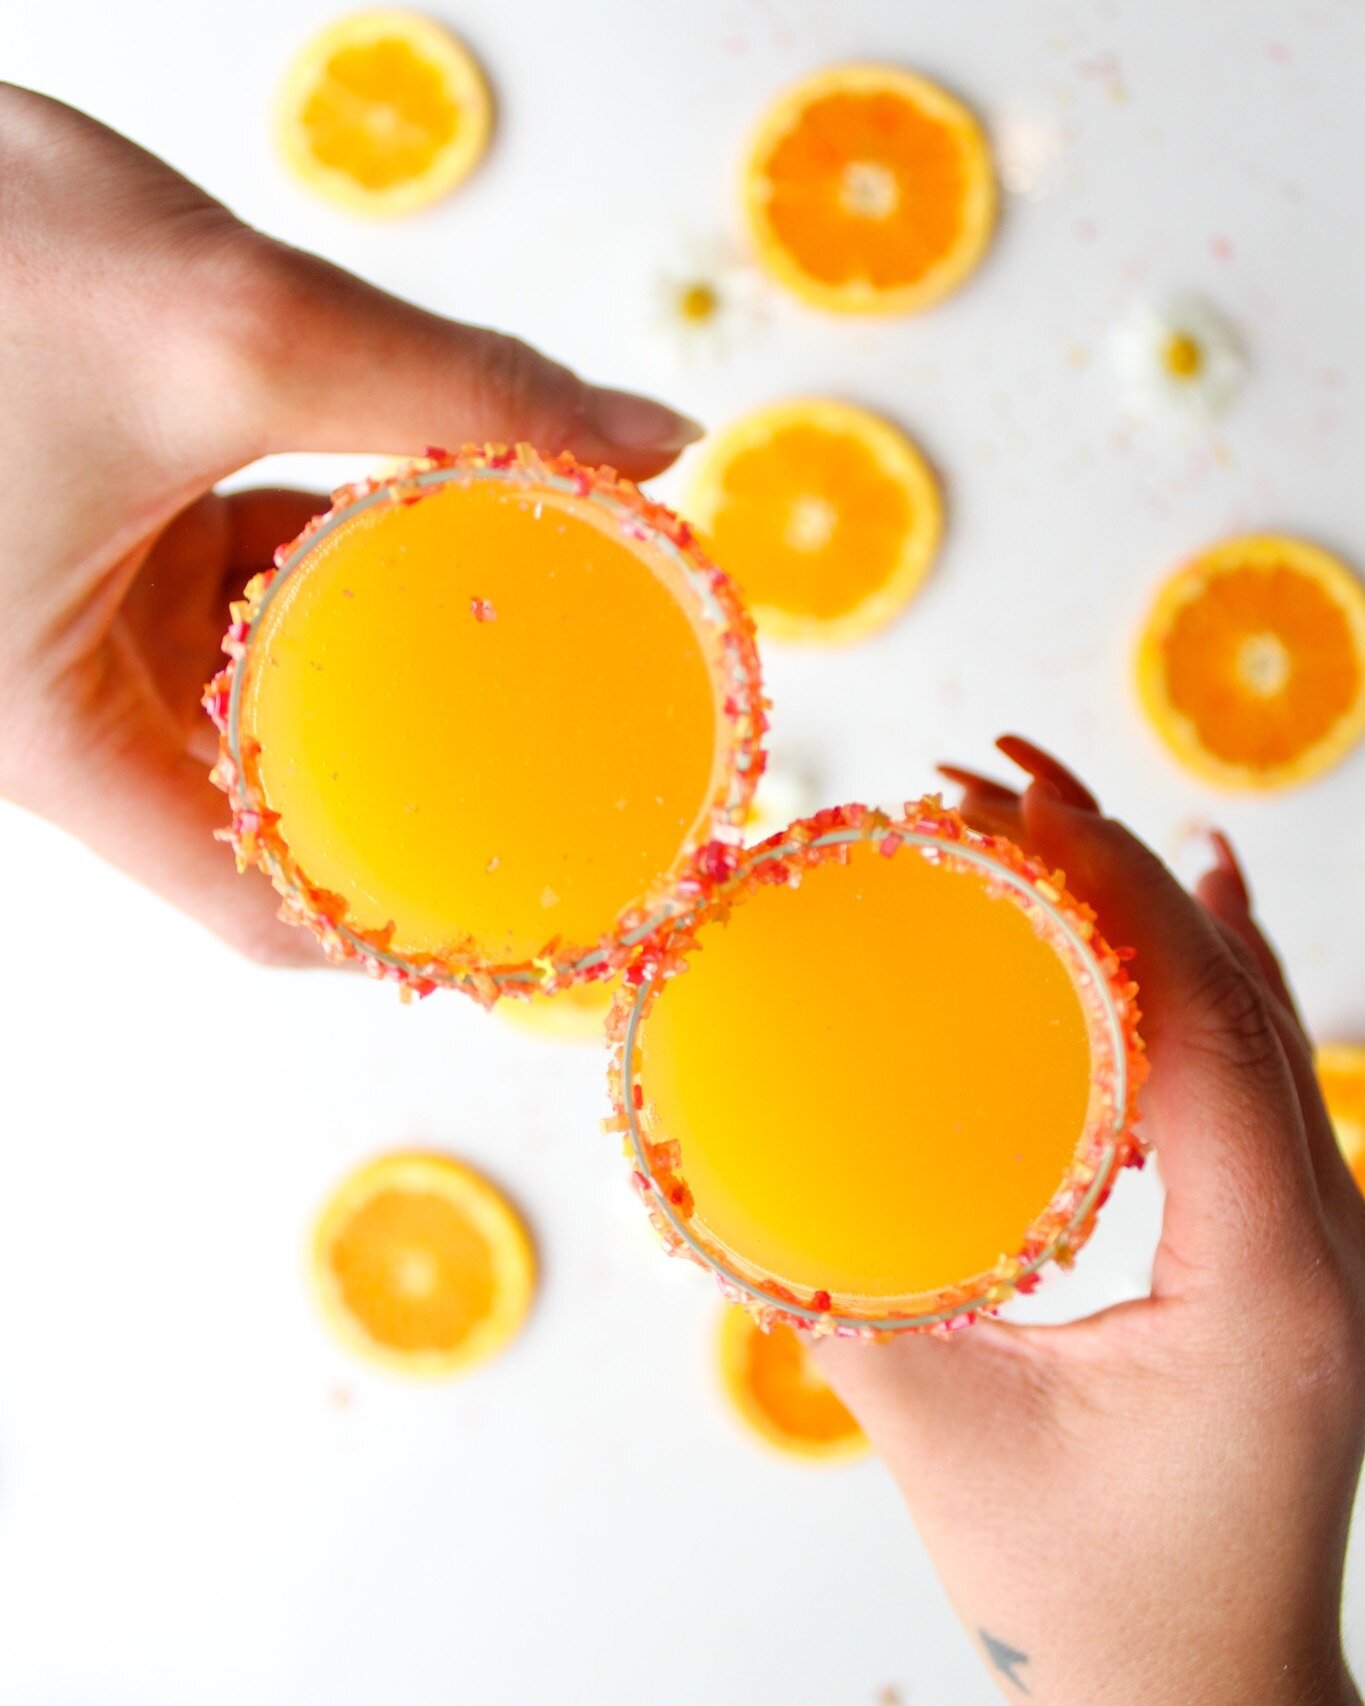 Happy National Mimosa Day! What are you drinking Today - your choice of juice, orange, or guava??